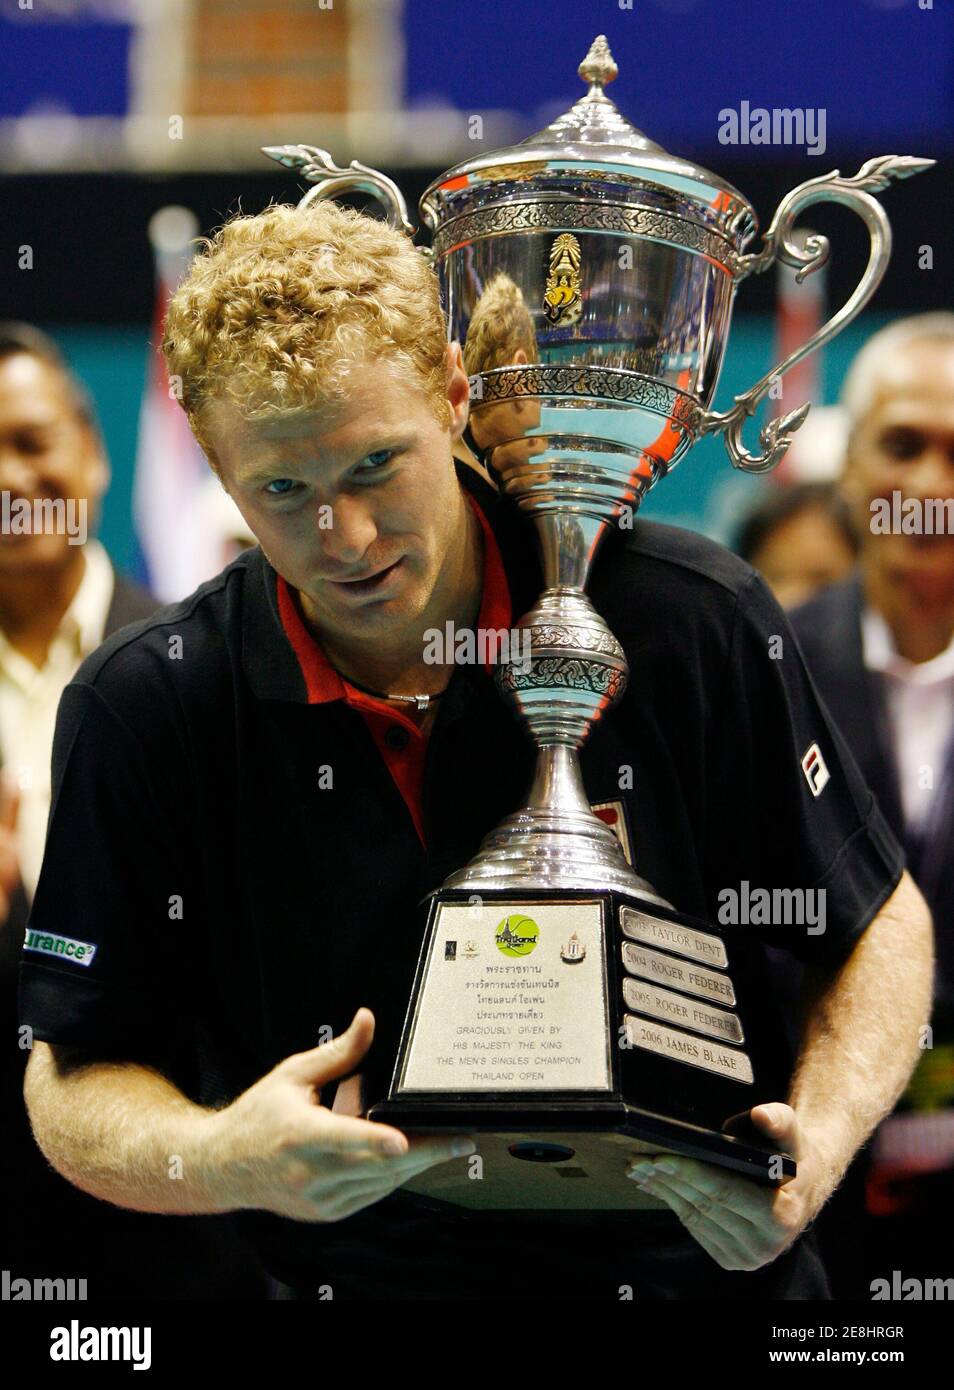 Dmitry Tursunov of Russia holds the trophy after winning the final match against Germany's Benjamin Becker at the Thailand Open 2007 in Bangkok, September 30, 2007.     REUTERS/Chaiwat Subprasom  (THAILAND) Stock Photo